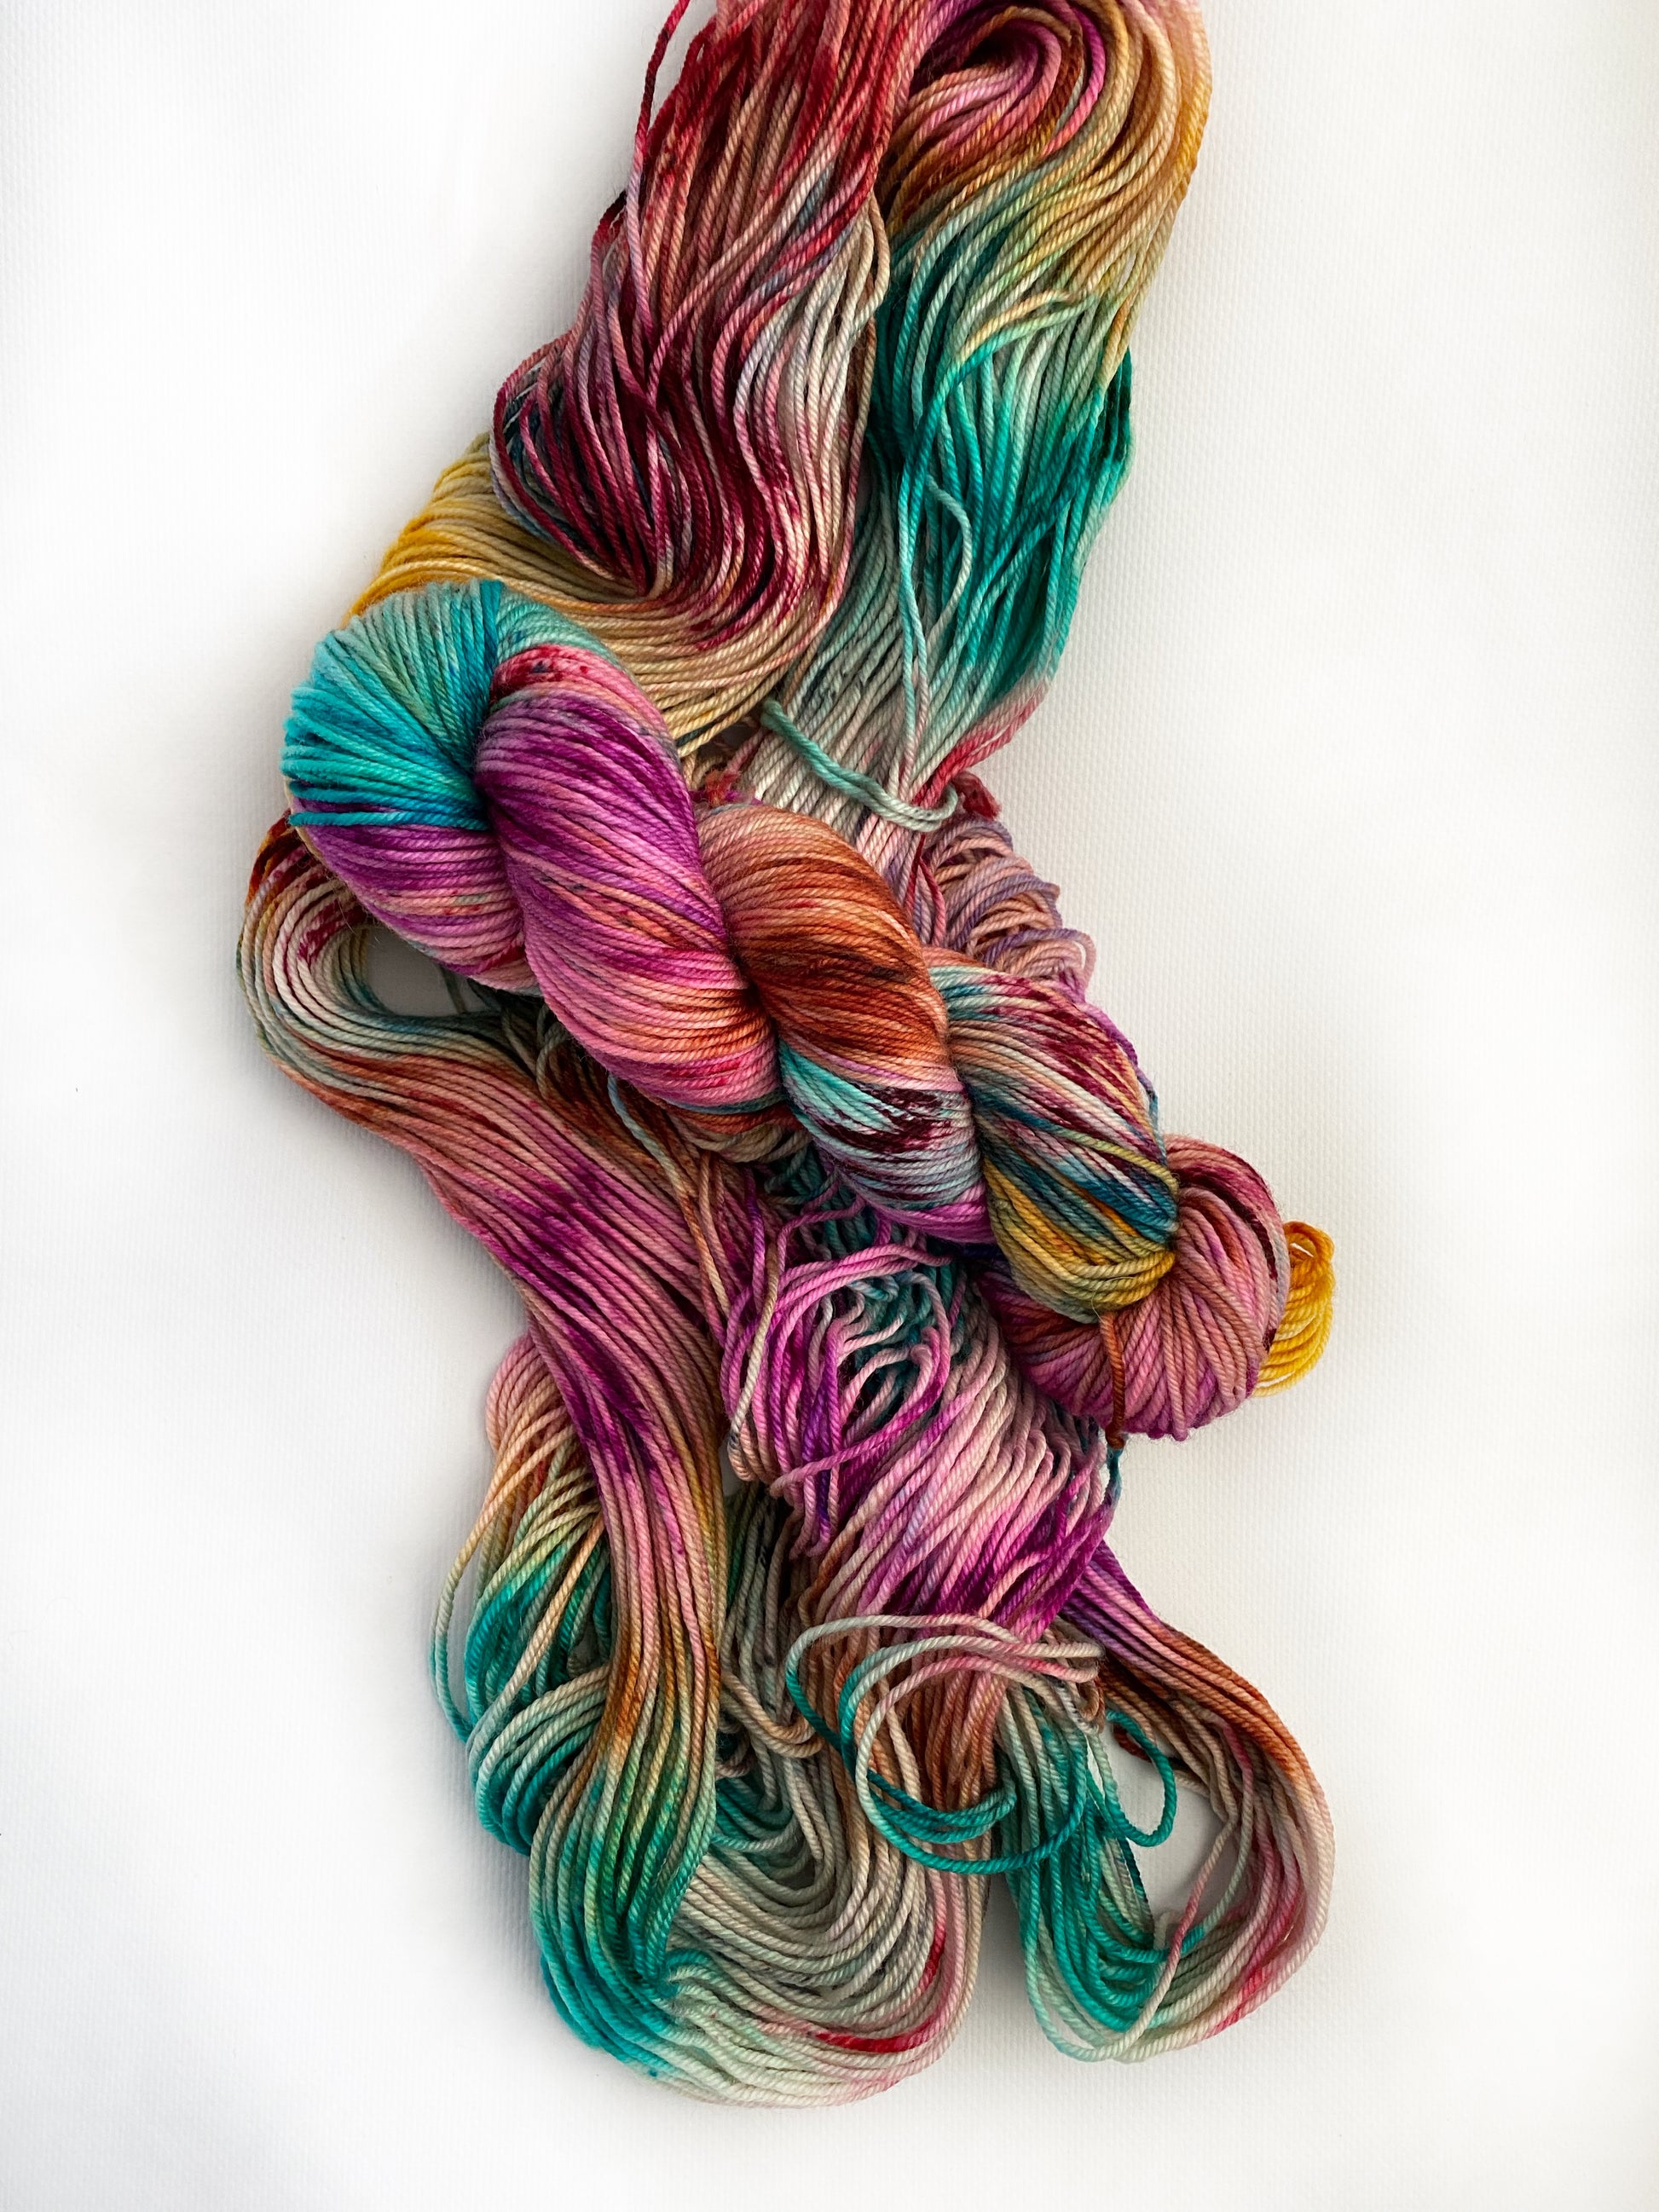 Unconditional Love - Worsted 3 Ply - Okanagan Dye Works